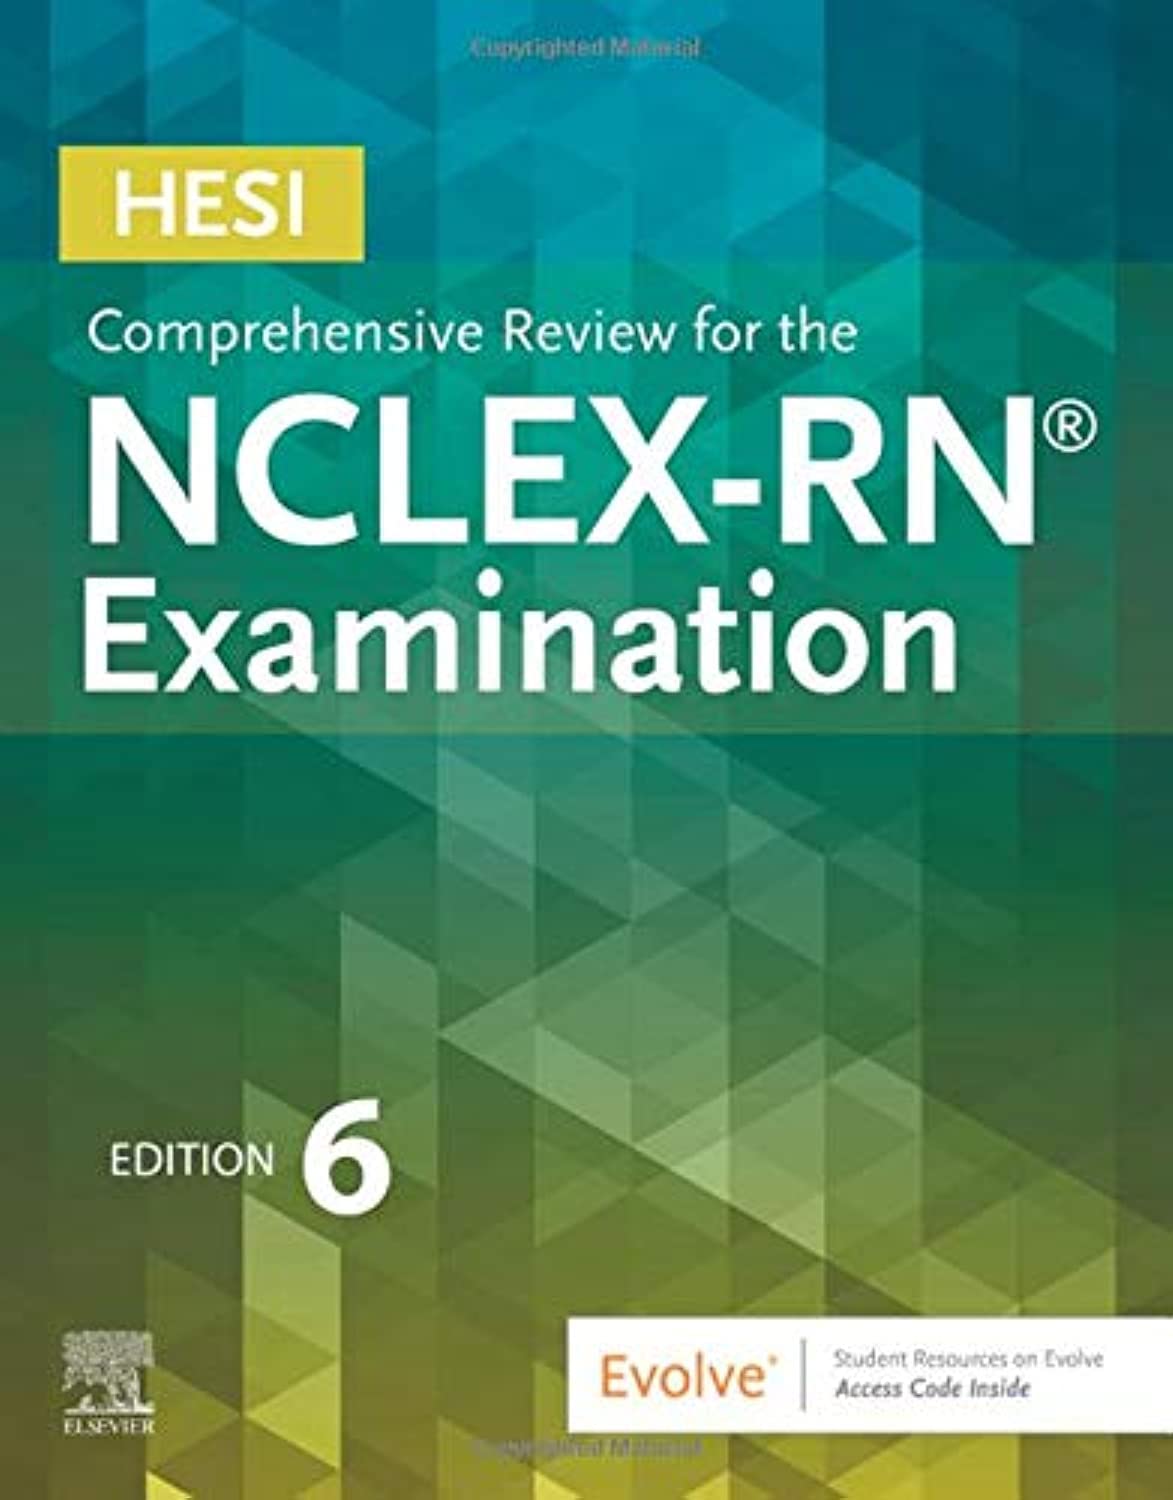 HESI Comprehensive Review for the NCLEX-RN Examination, 6th Edition by HESI